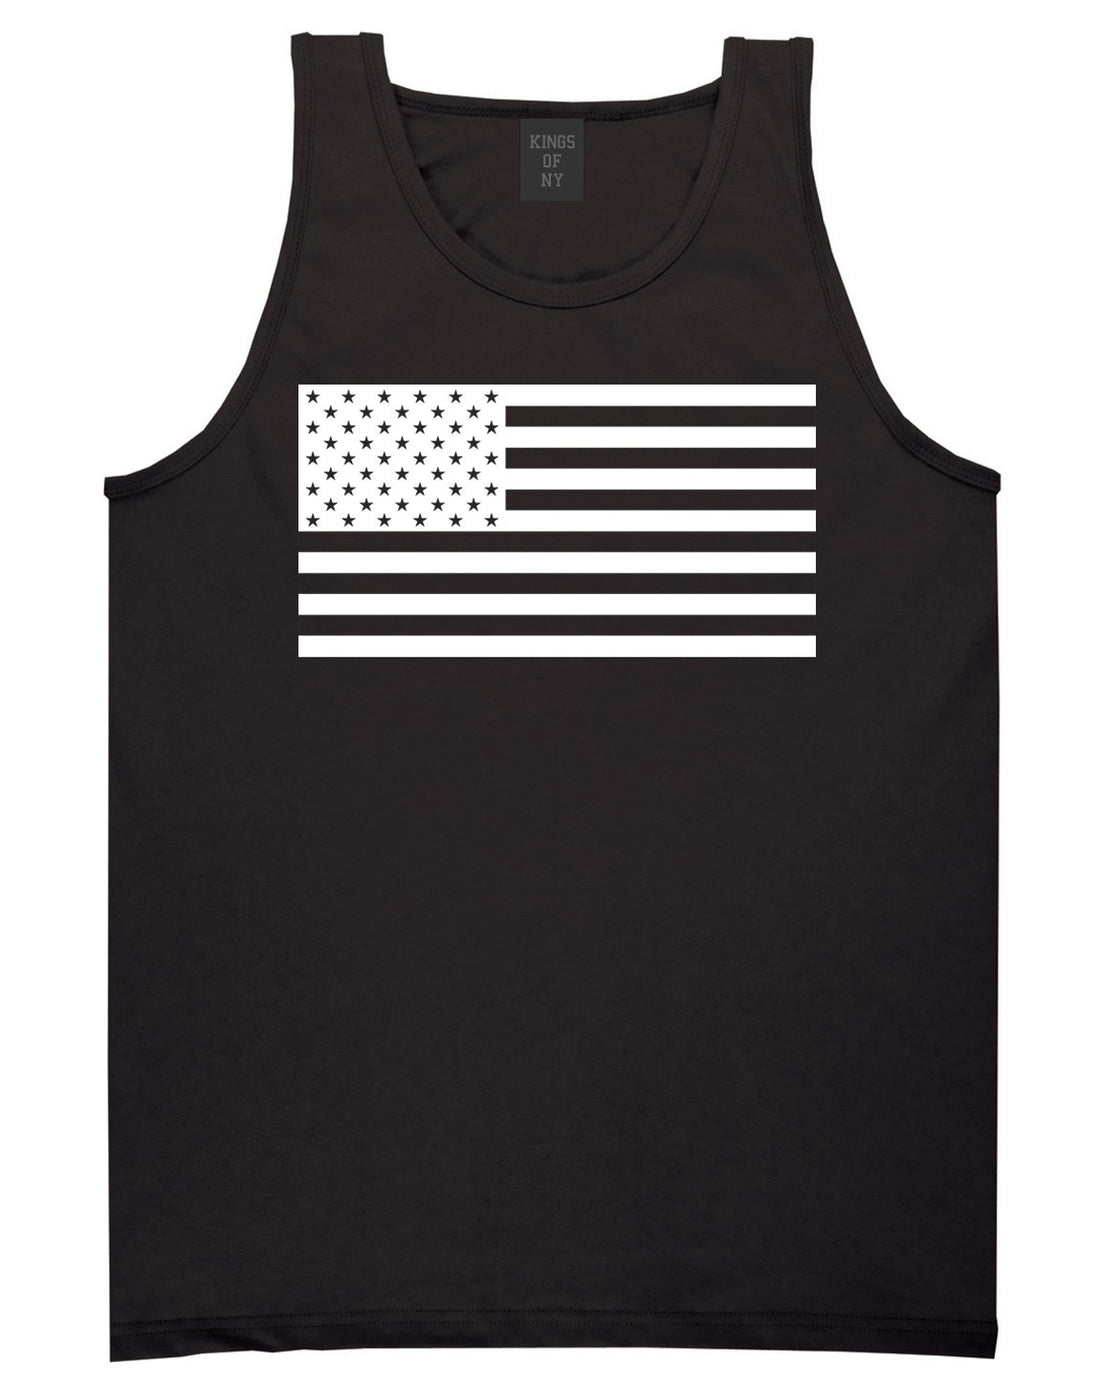 Kings Of NY American Flag Goth Style Tank Top in Black